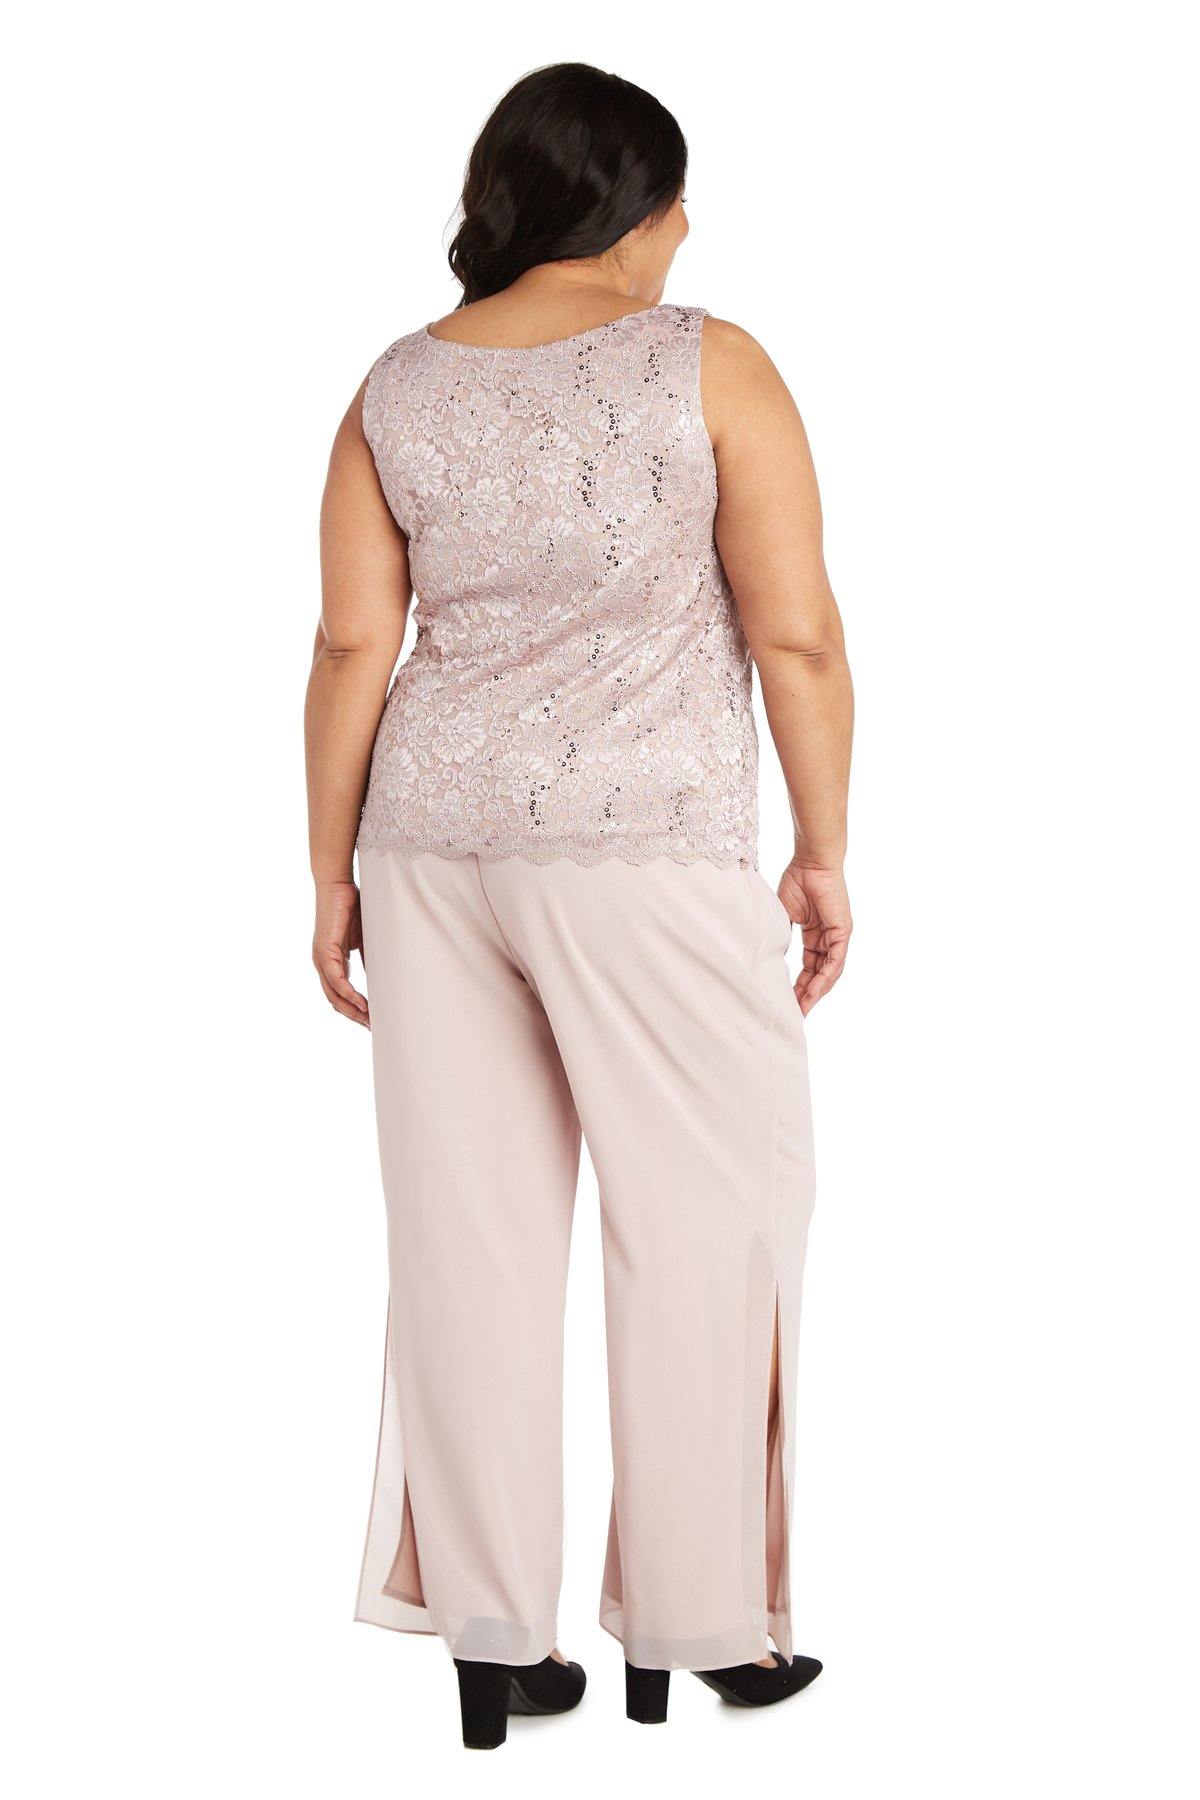 R&M Richards 7506 Mother Of The Bride Pant Suit for $39.99 – The